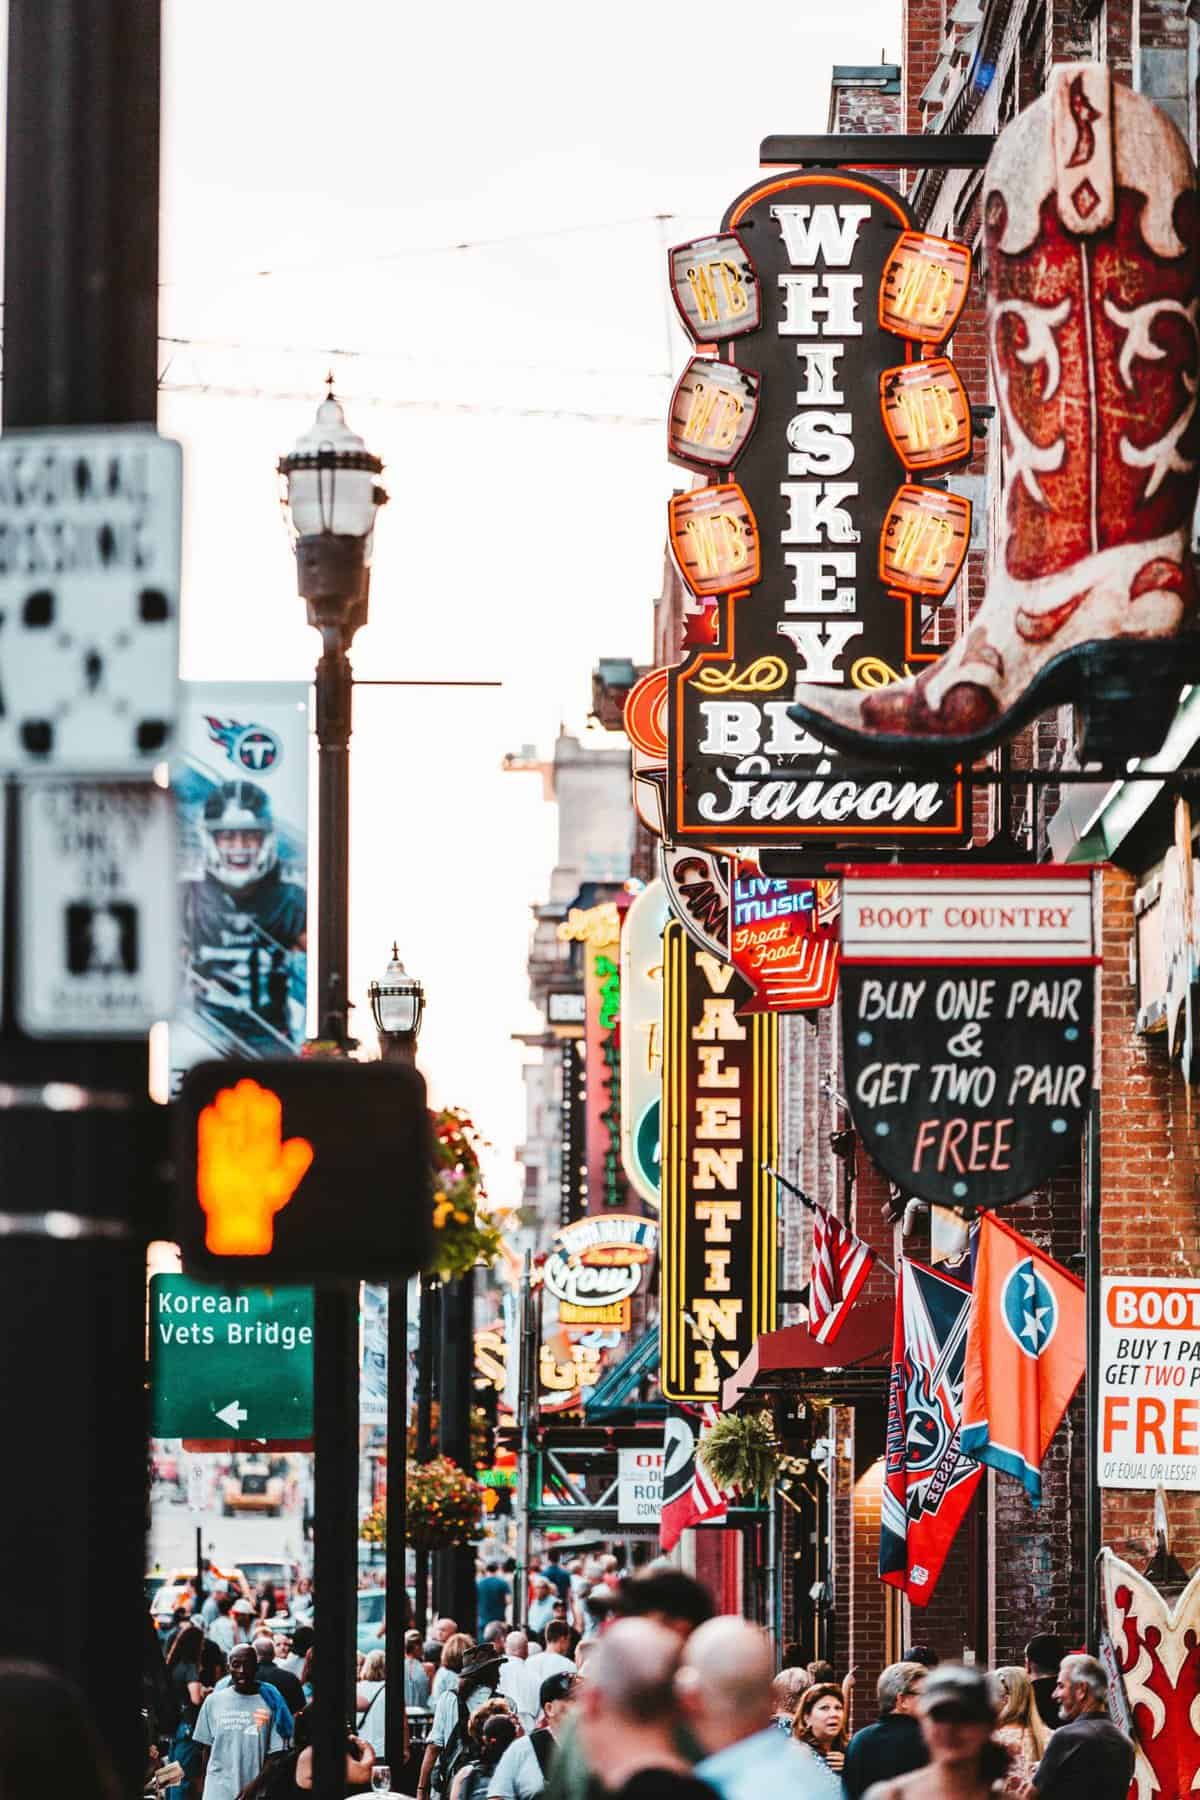 A shot of the entertainment and bars in Nashville's iconic Broadway